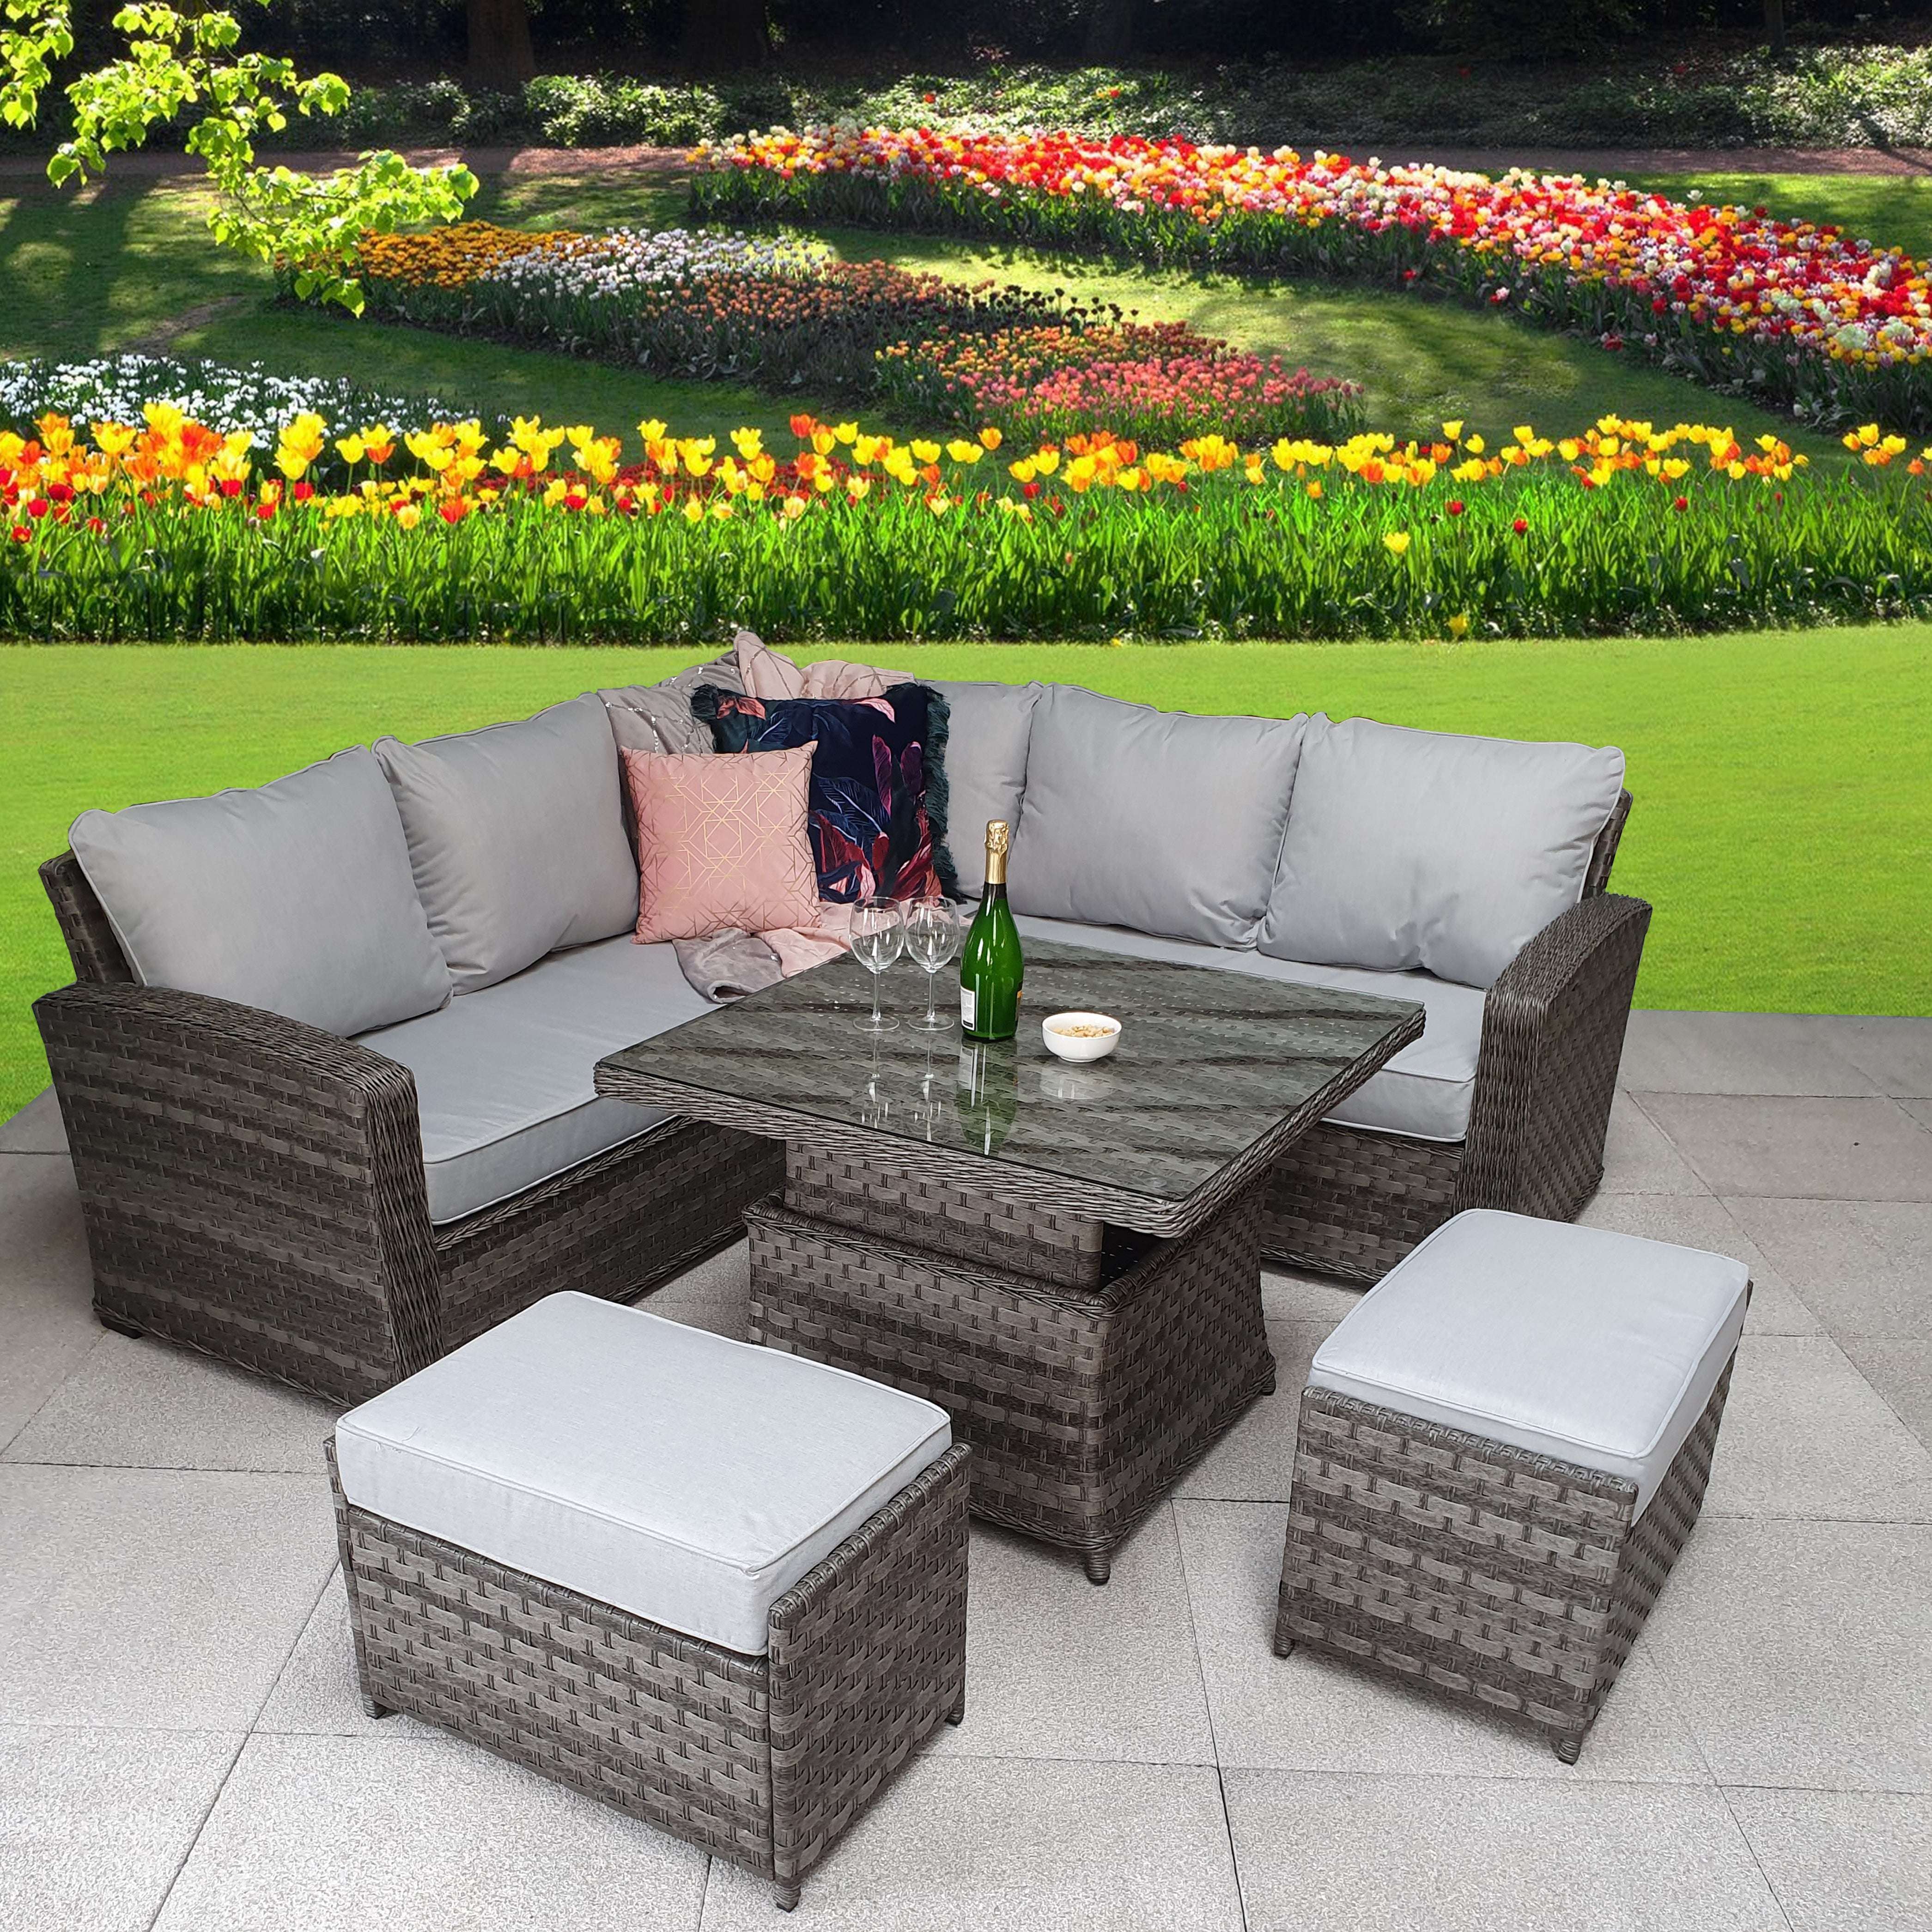 Exceptional Garden:Signature Weave Grace Corner Dining Set with Lifting Table